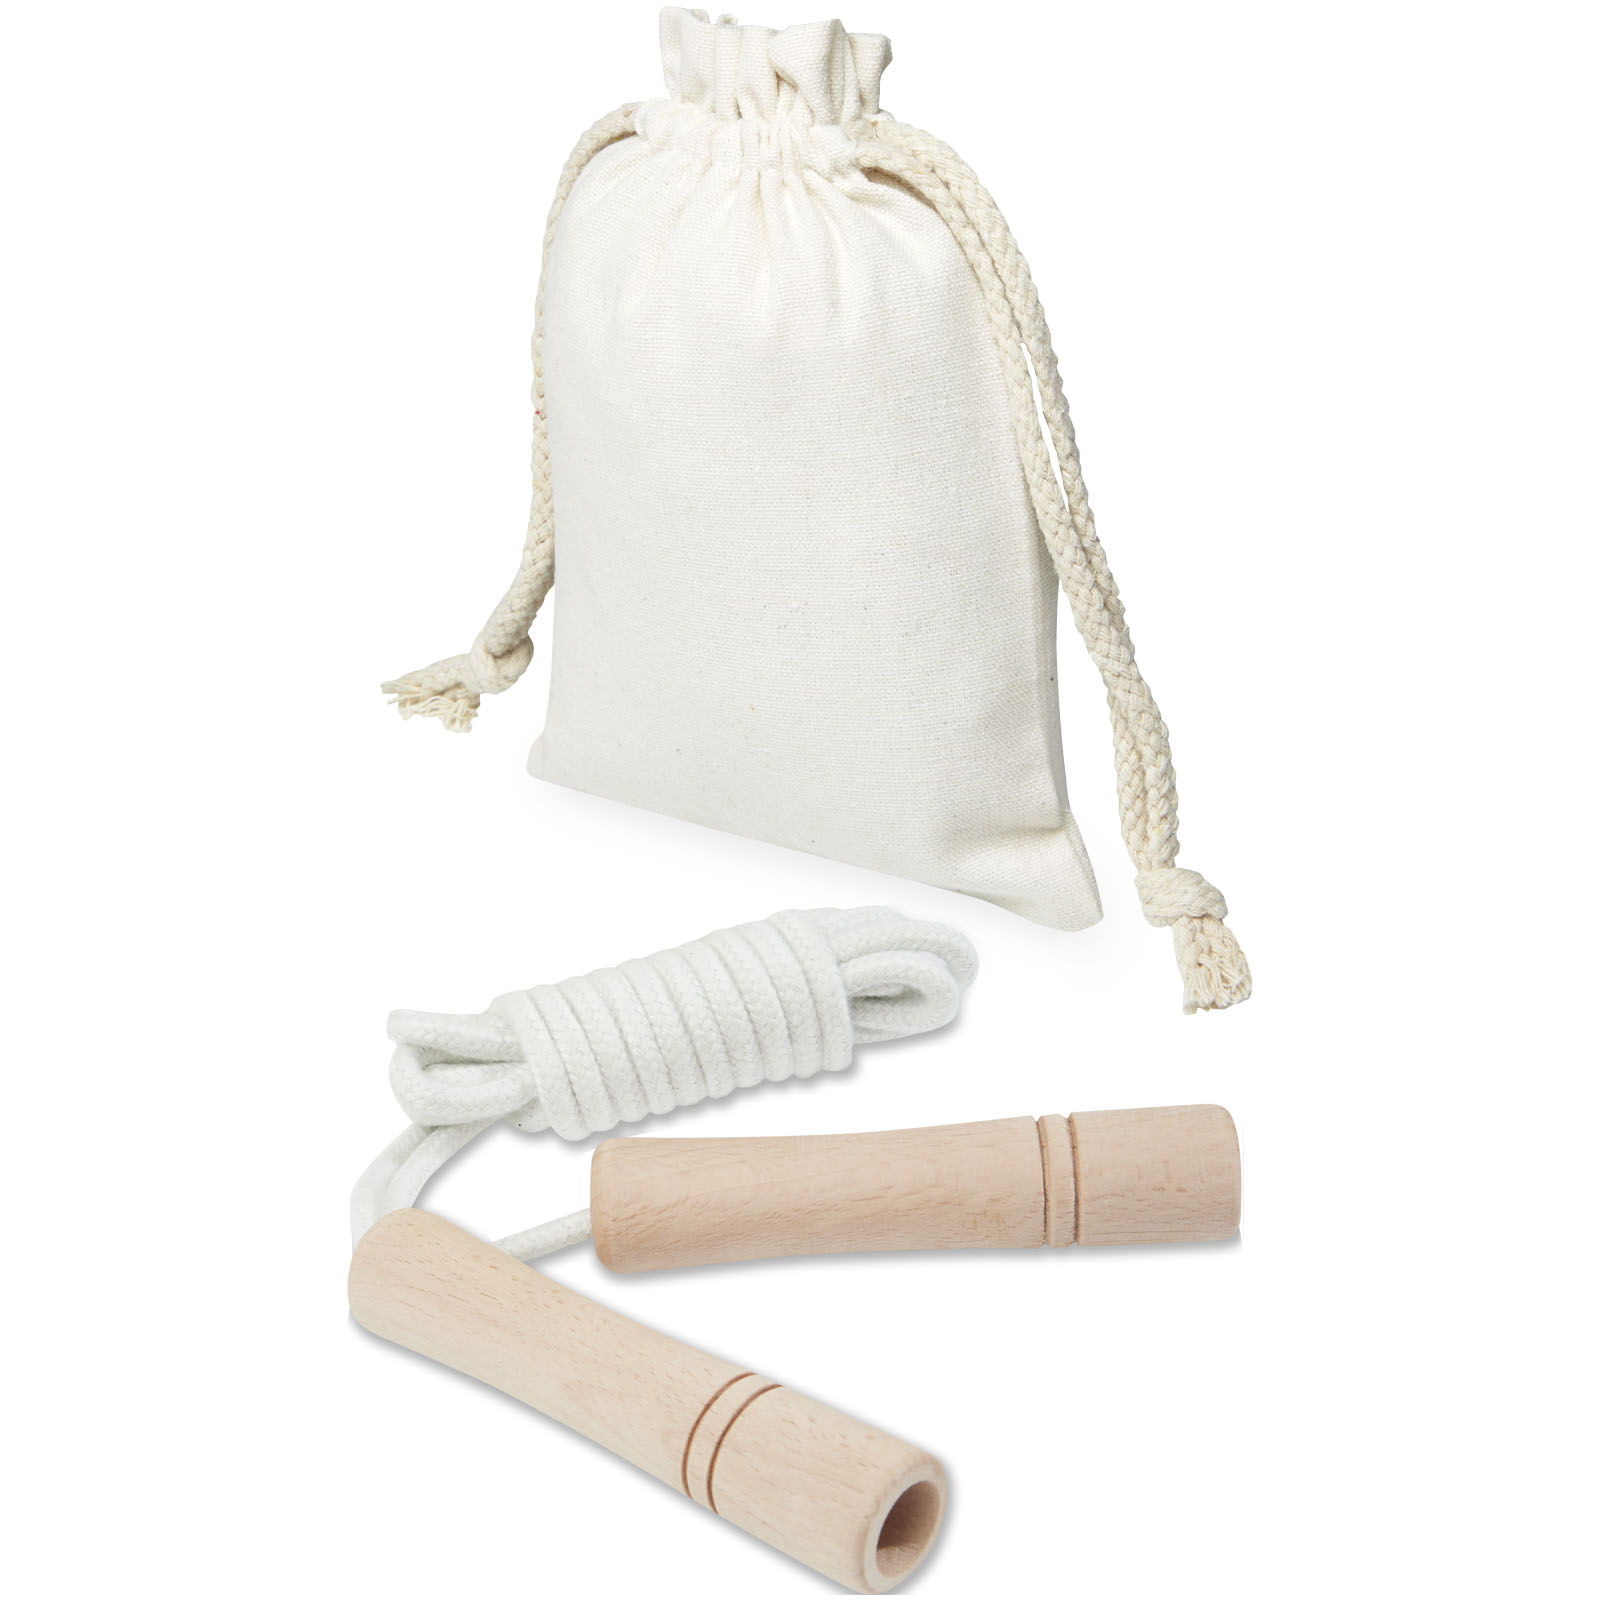 Advertising Fitness & Sport - Denise wooden skipping rope in cotton pouch